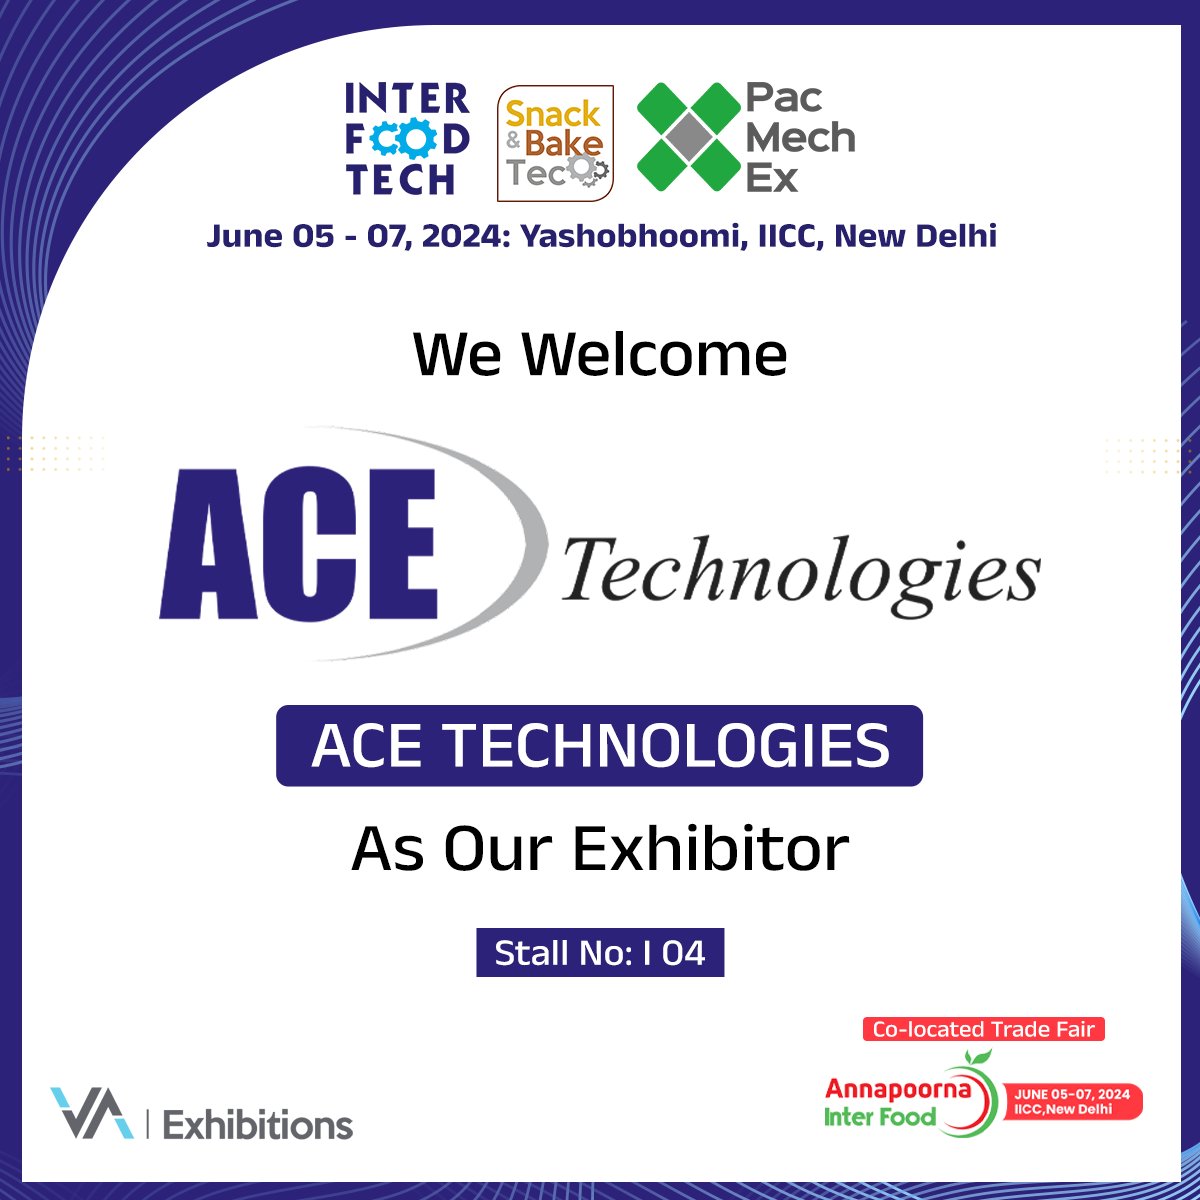 We are delighted to introduce #ACETechnologies Group as our respected #Exhibitor.

For more information about the exhibition, please visit our websites: interfoodtech.com, snackbaketec.com.

#InterFoodTech2024  #FoodTechExpo #SustainableSolutions